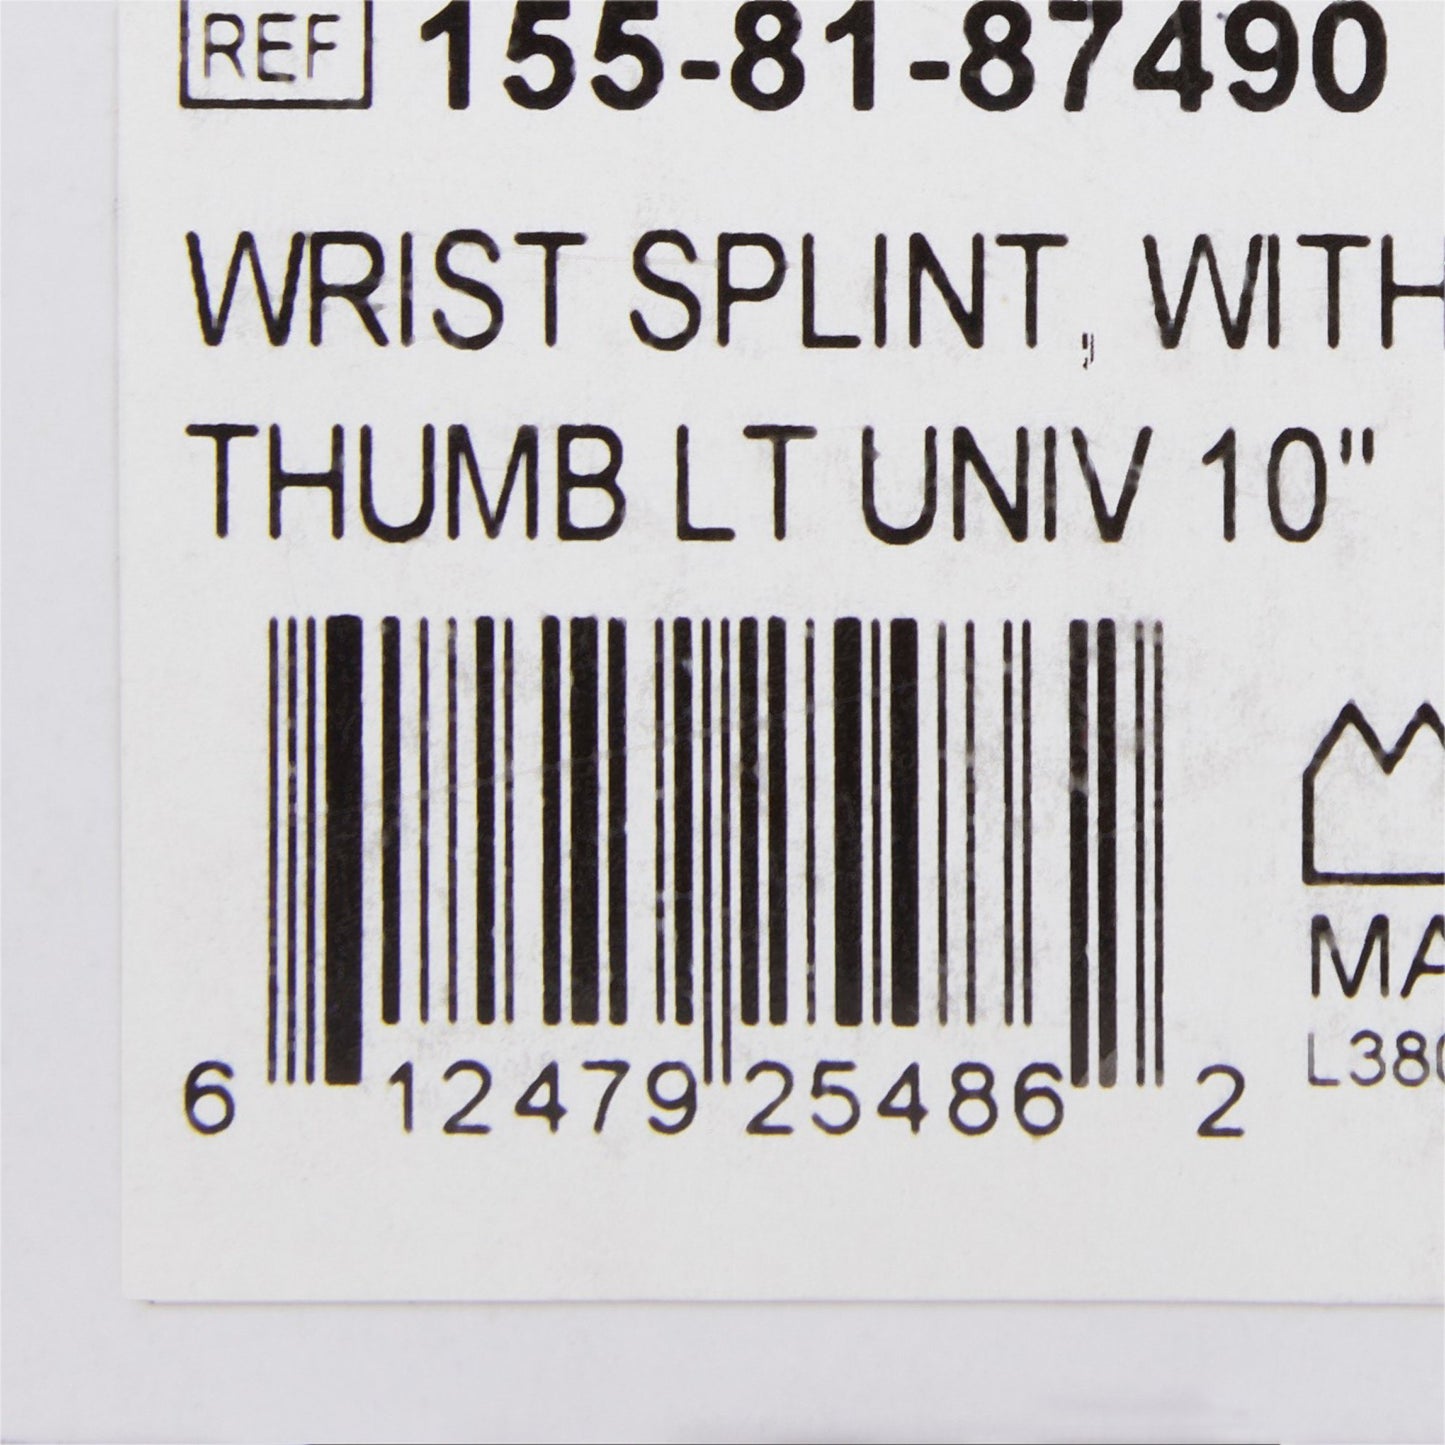 McKesson Left Wrist Splint with Abducted Thumb, One Size Fits Most